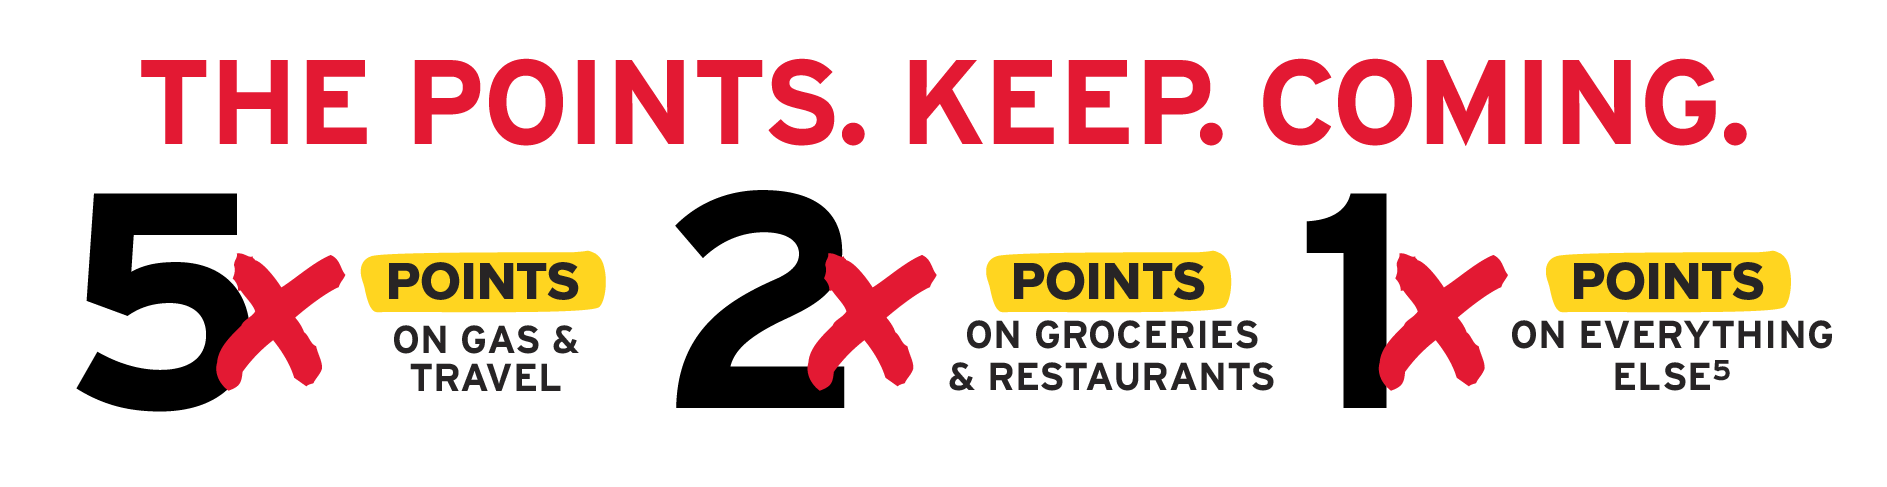 5x points on gas & travel, 2x points on groceries & restaurants, 1x points on everything else